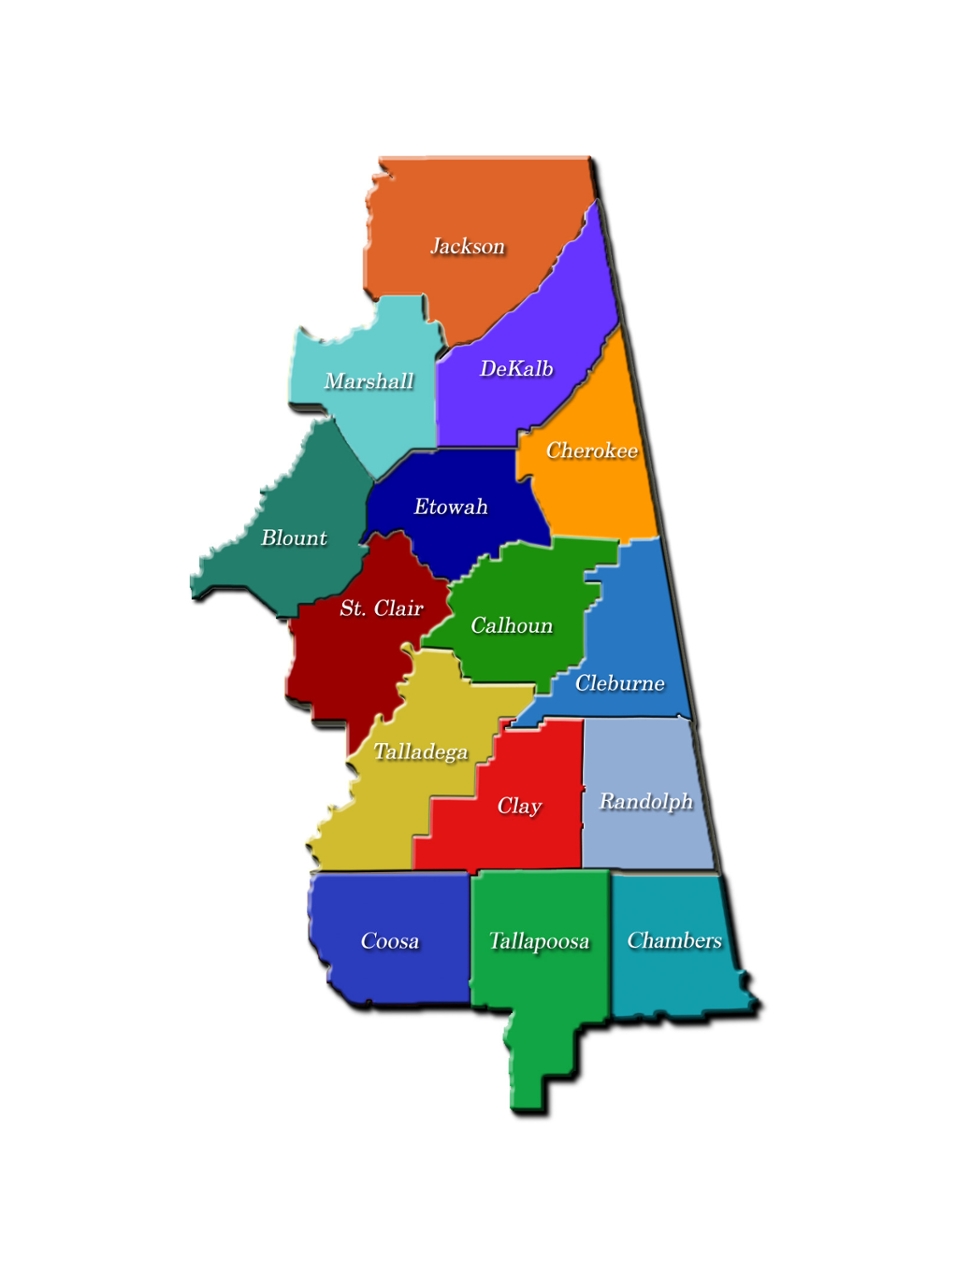 Portion of an Alabama Map depicting the 15 counties included as part of the economic summit